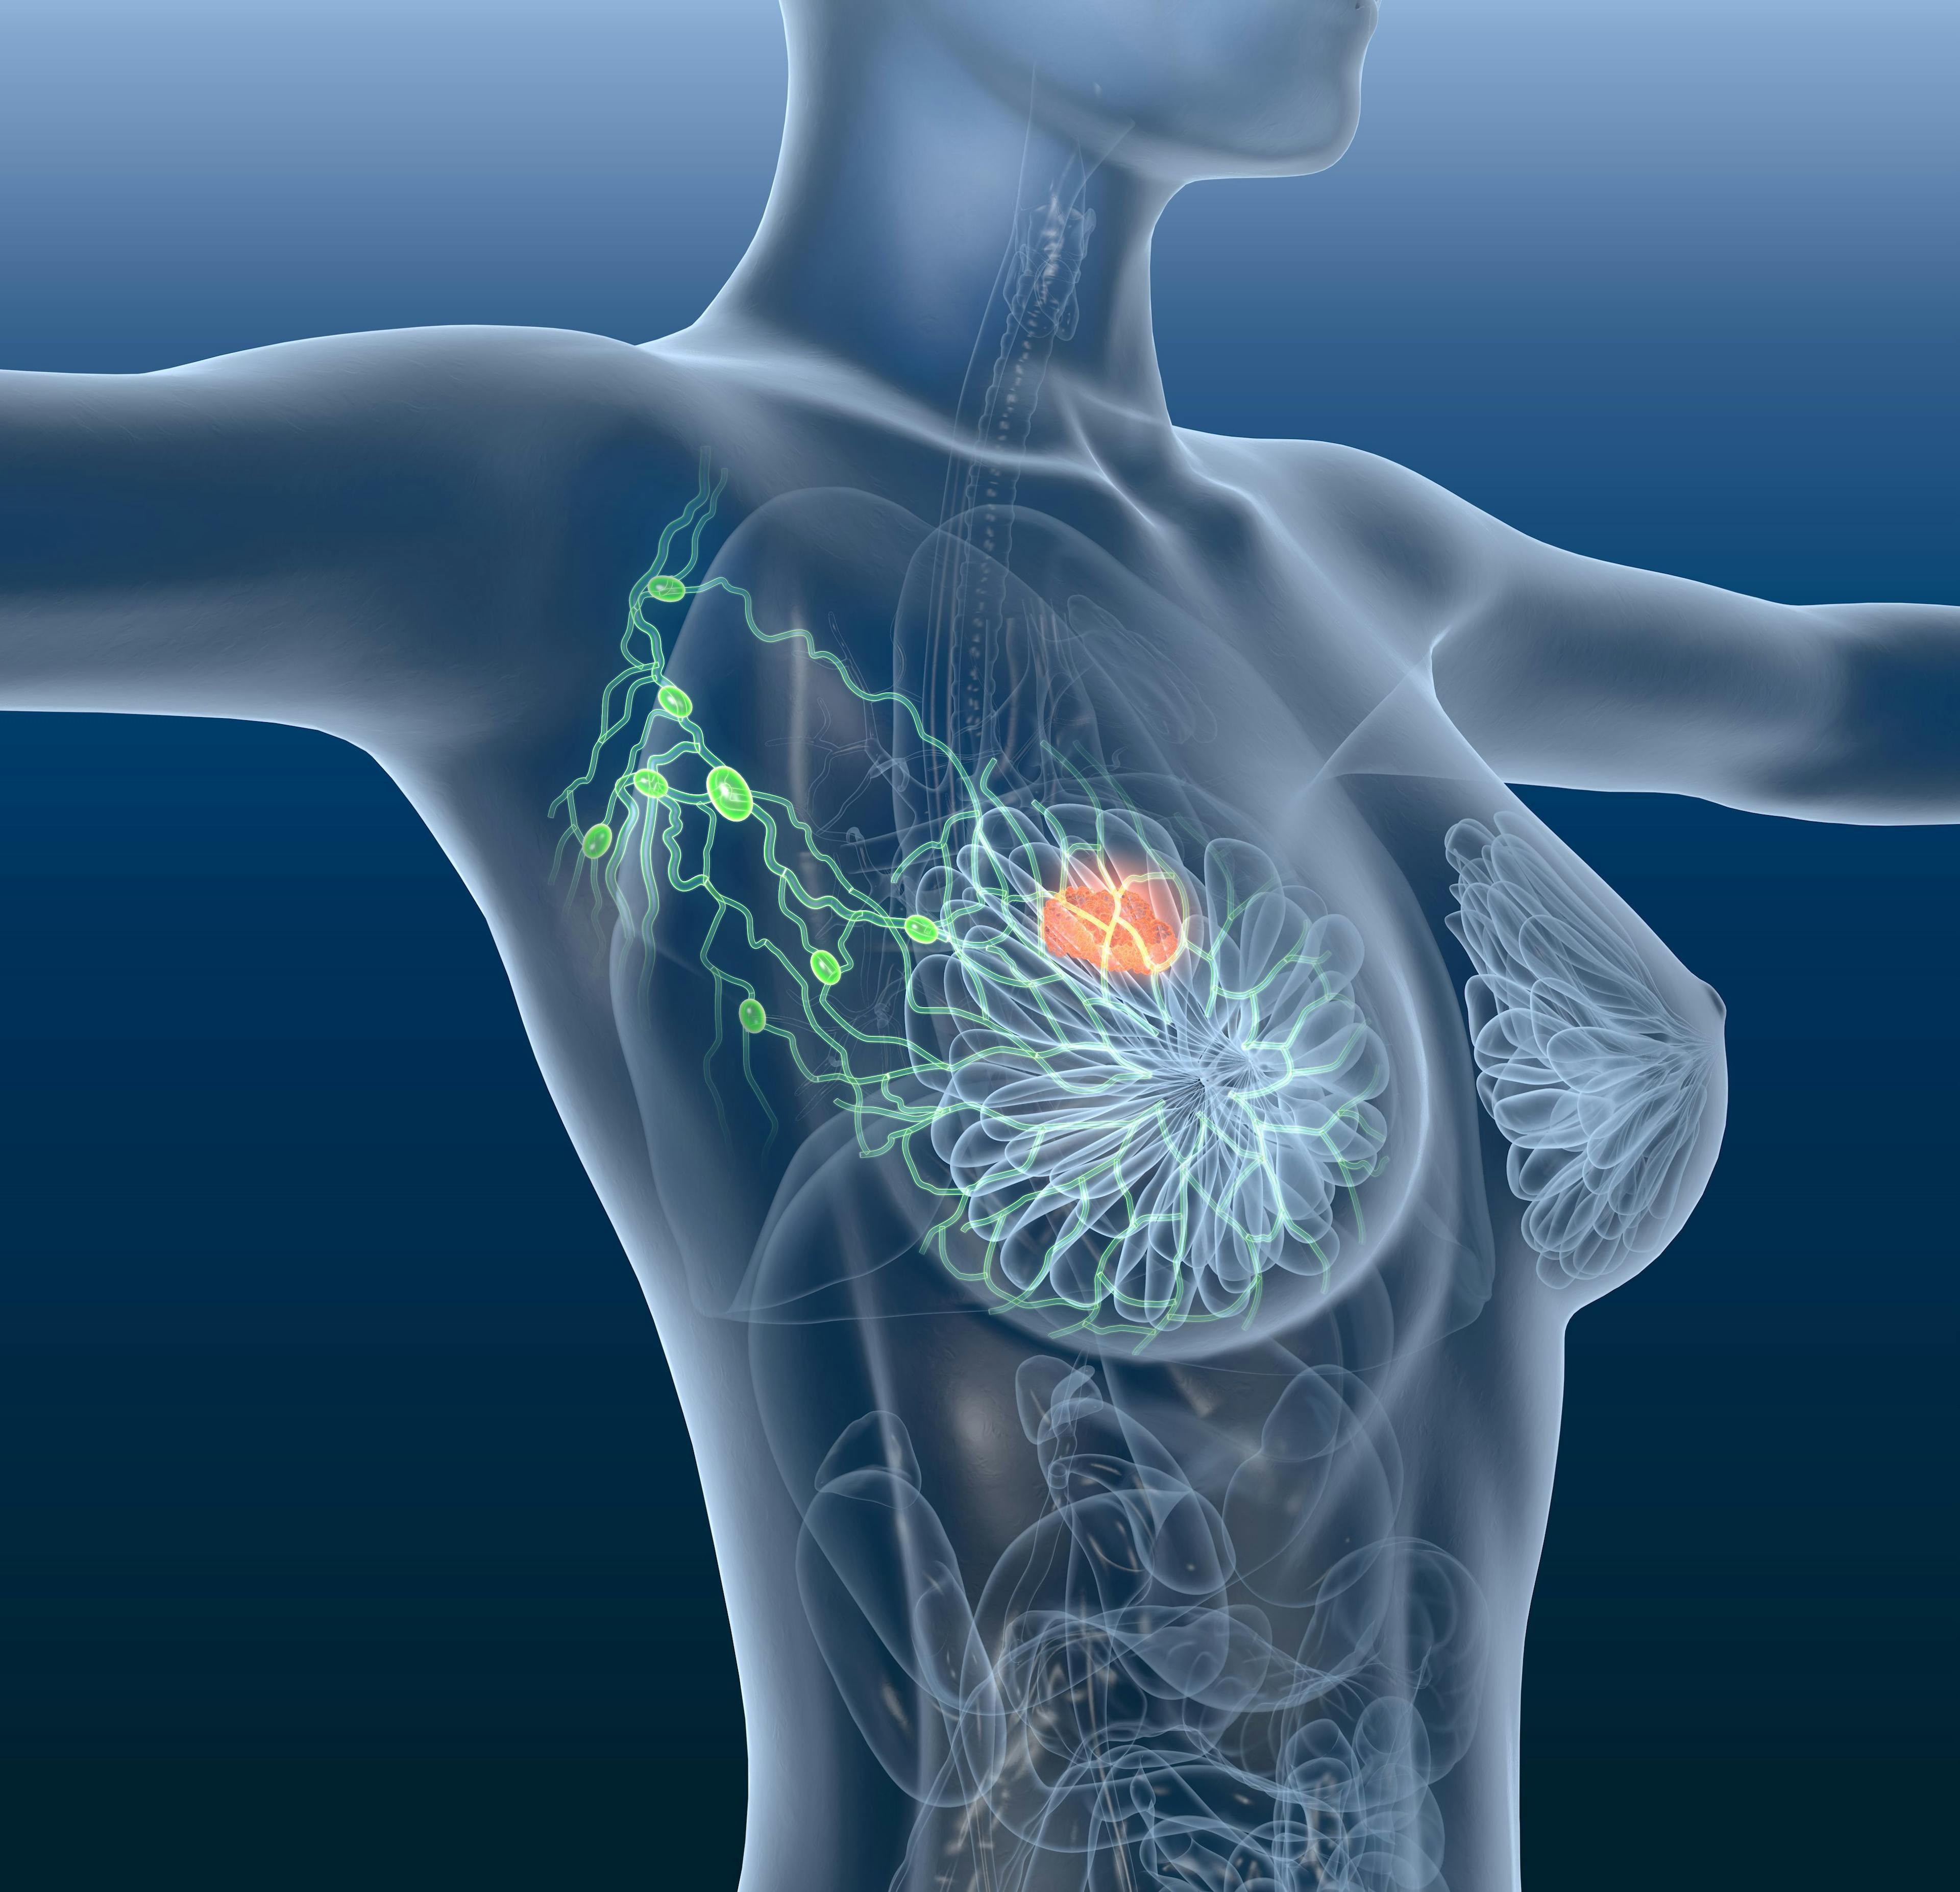 Adverse Effects From Olaparib Can Be Amenable in High-Risk Early Breast Cancer Subset